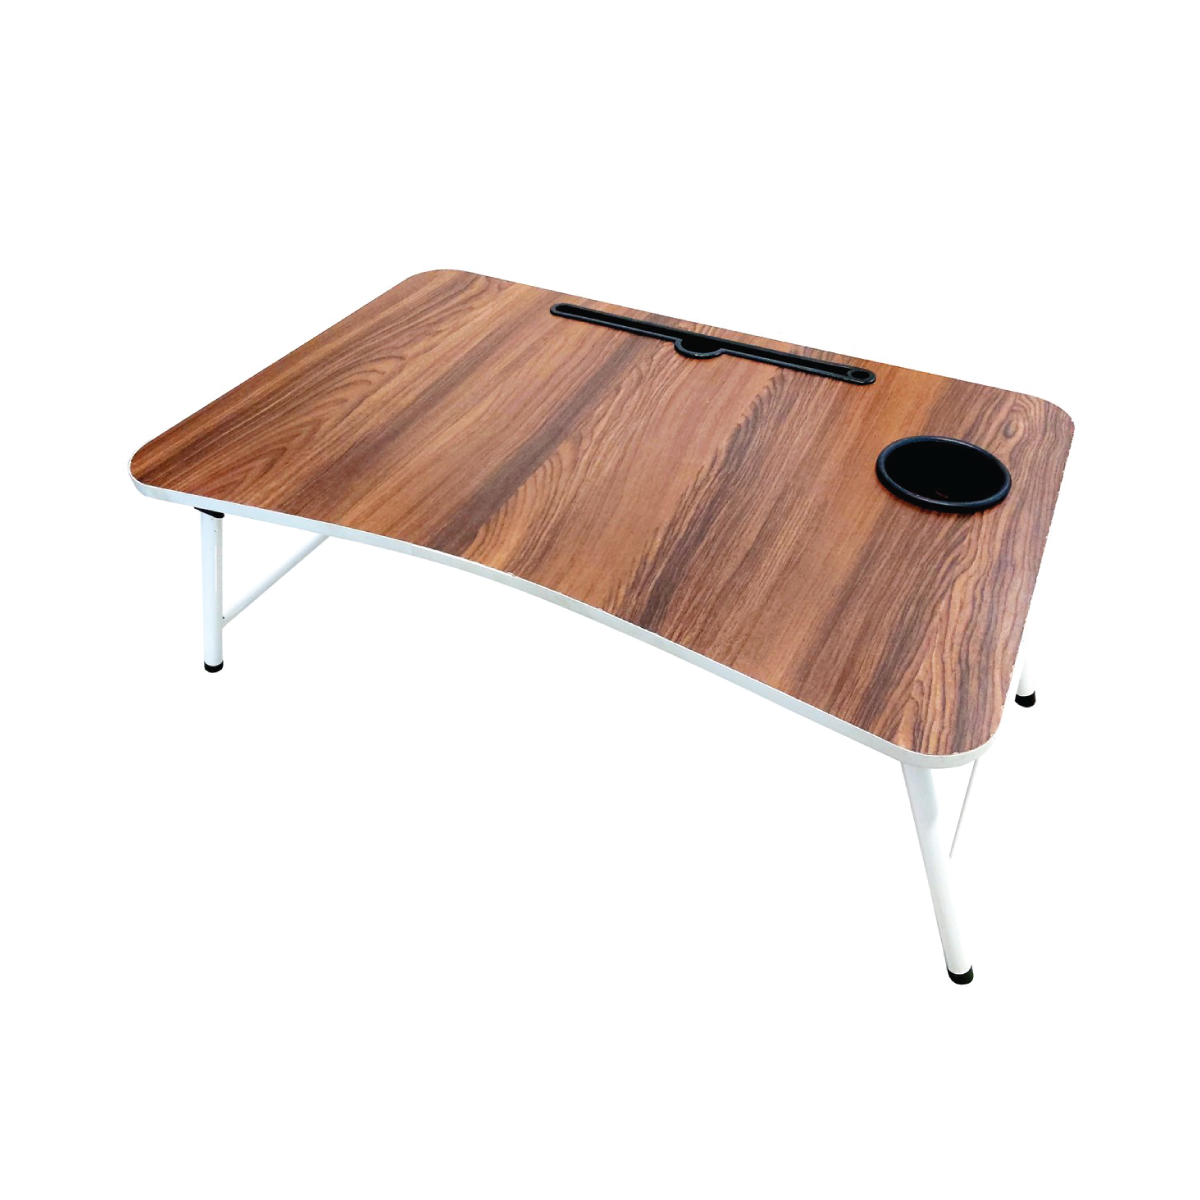 Folding Wooden Laptop Desk Table - For Office Use, Personal Use, Students Study Table, Corporate Gifting